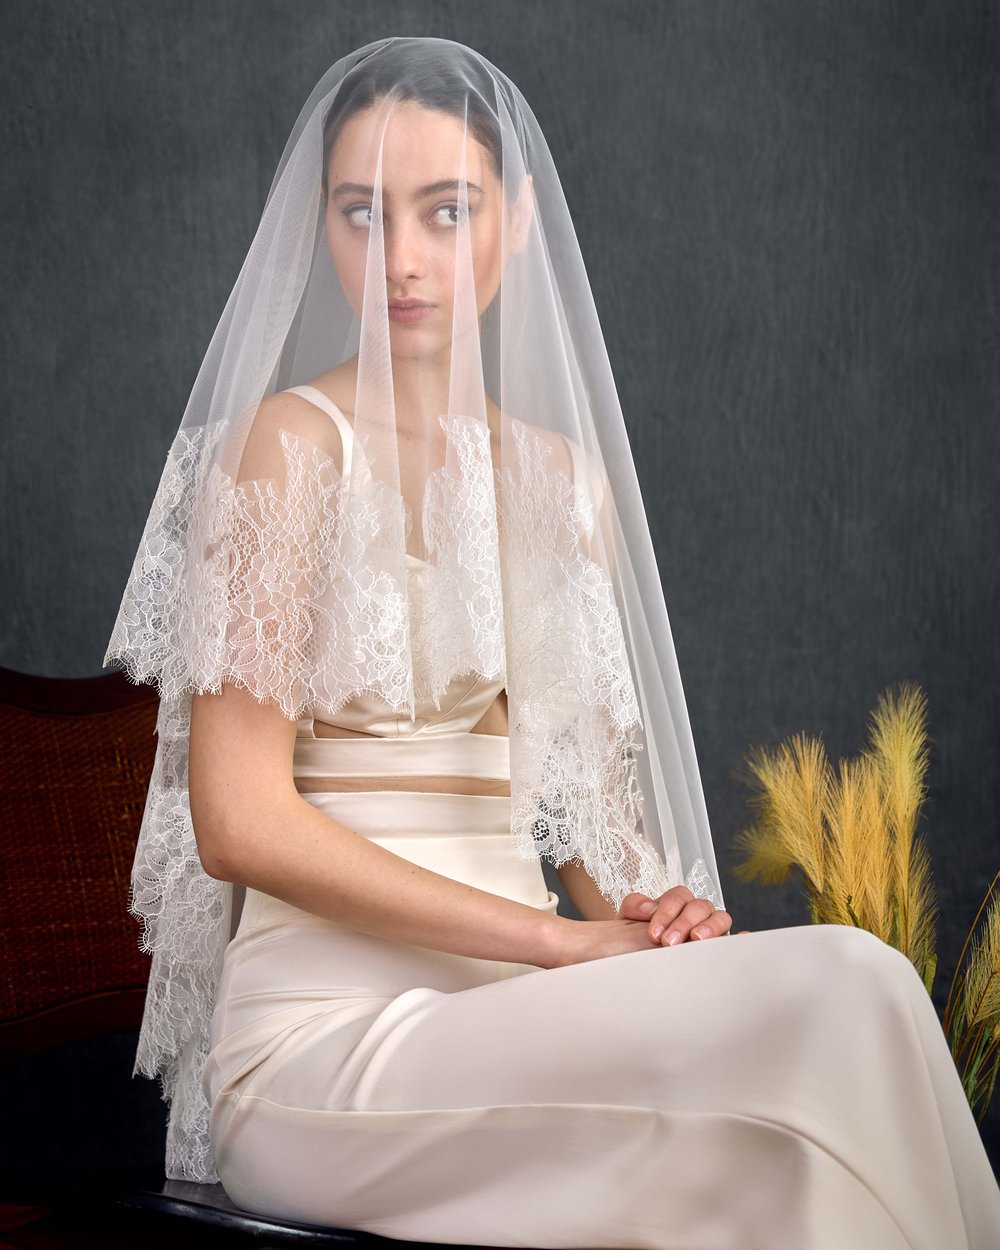 YouLaPan Cathedral Length Thin Scallop Lace Trim Single Tier Edge Wedding Veil Mantilla White / 300cm 118 inch